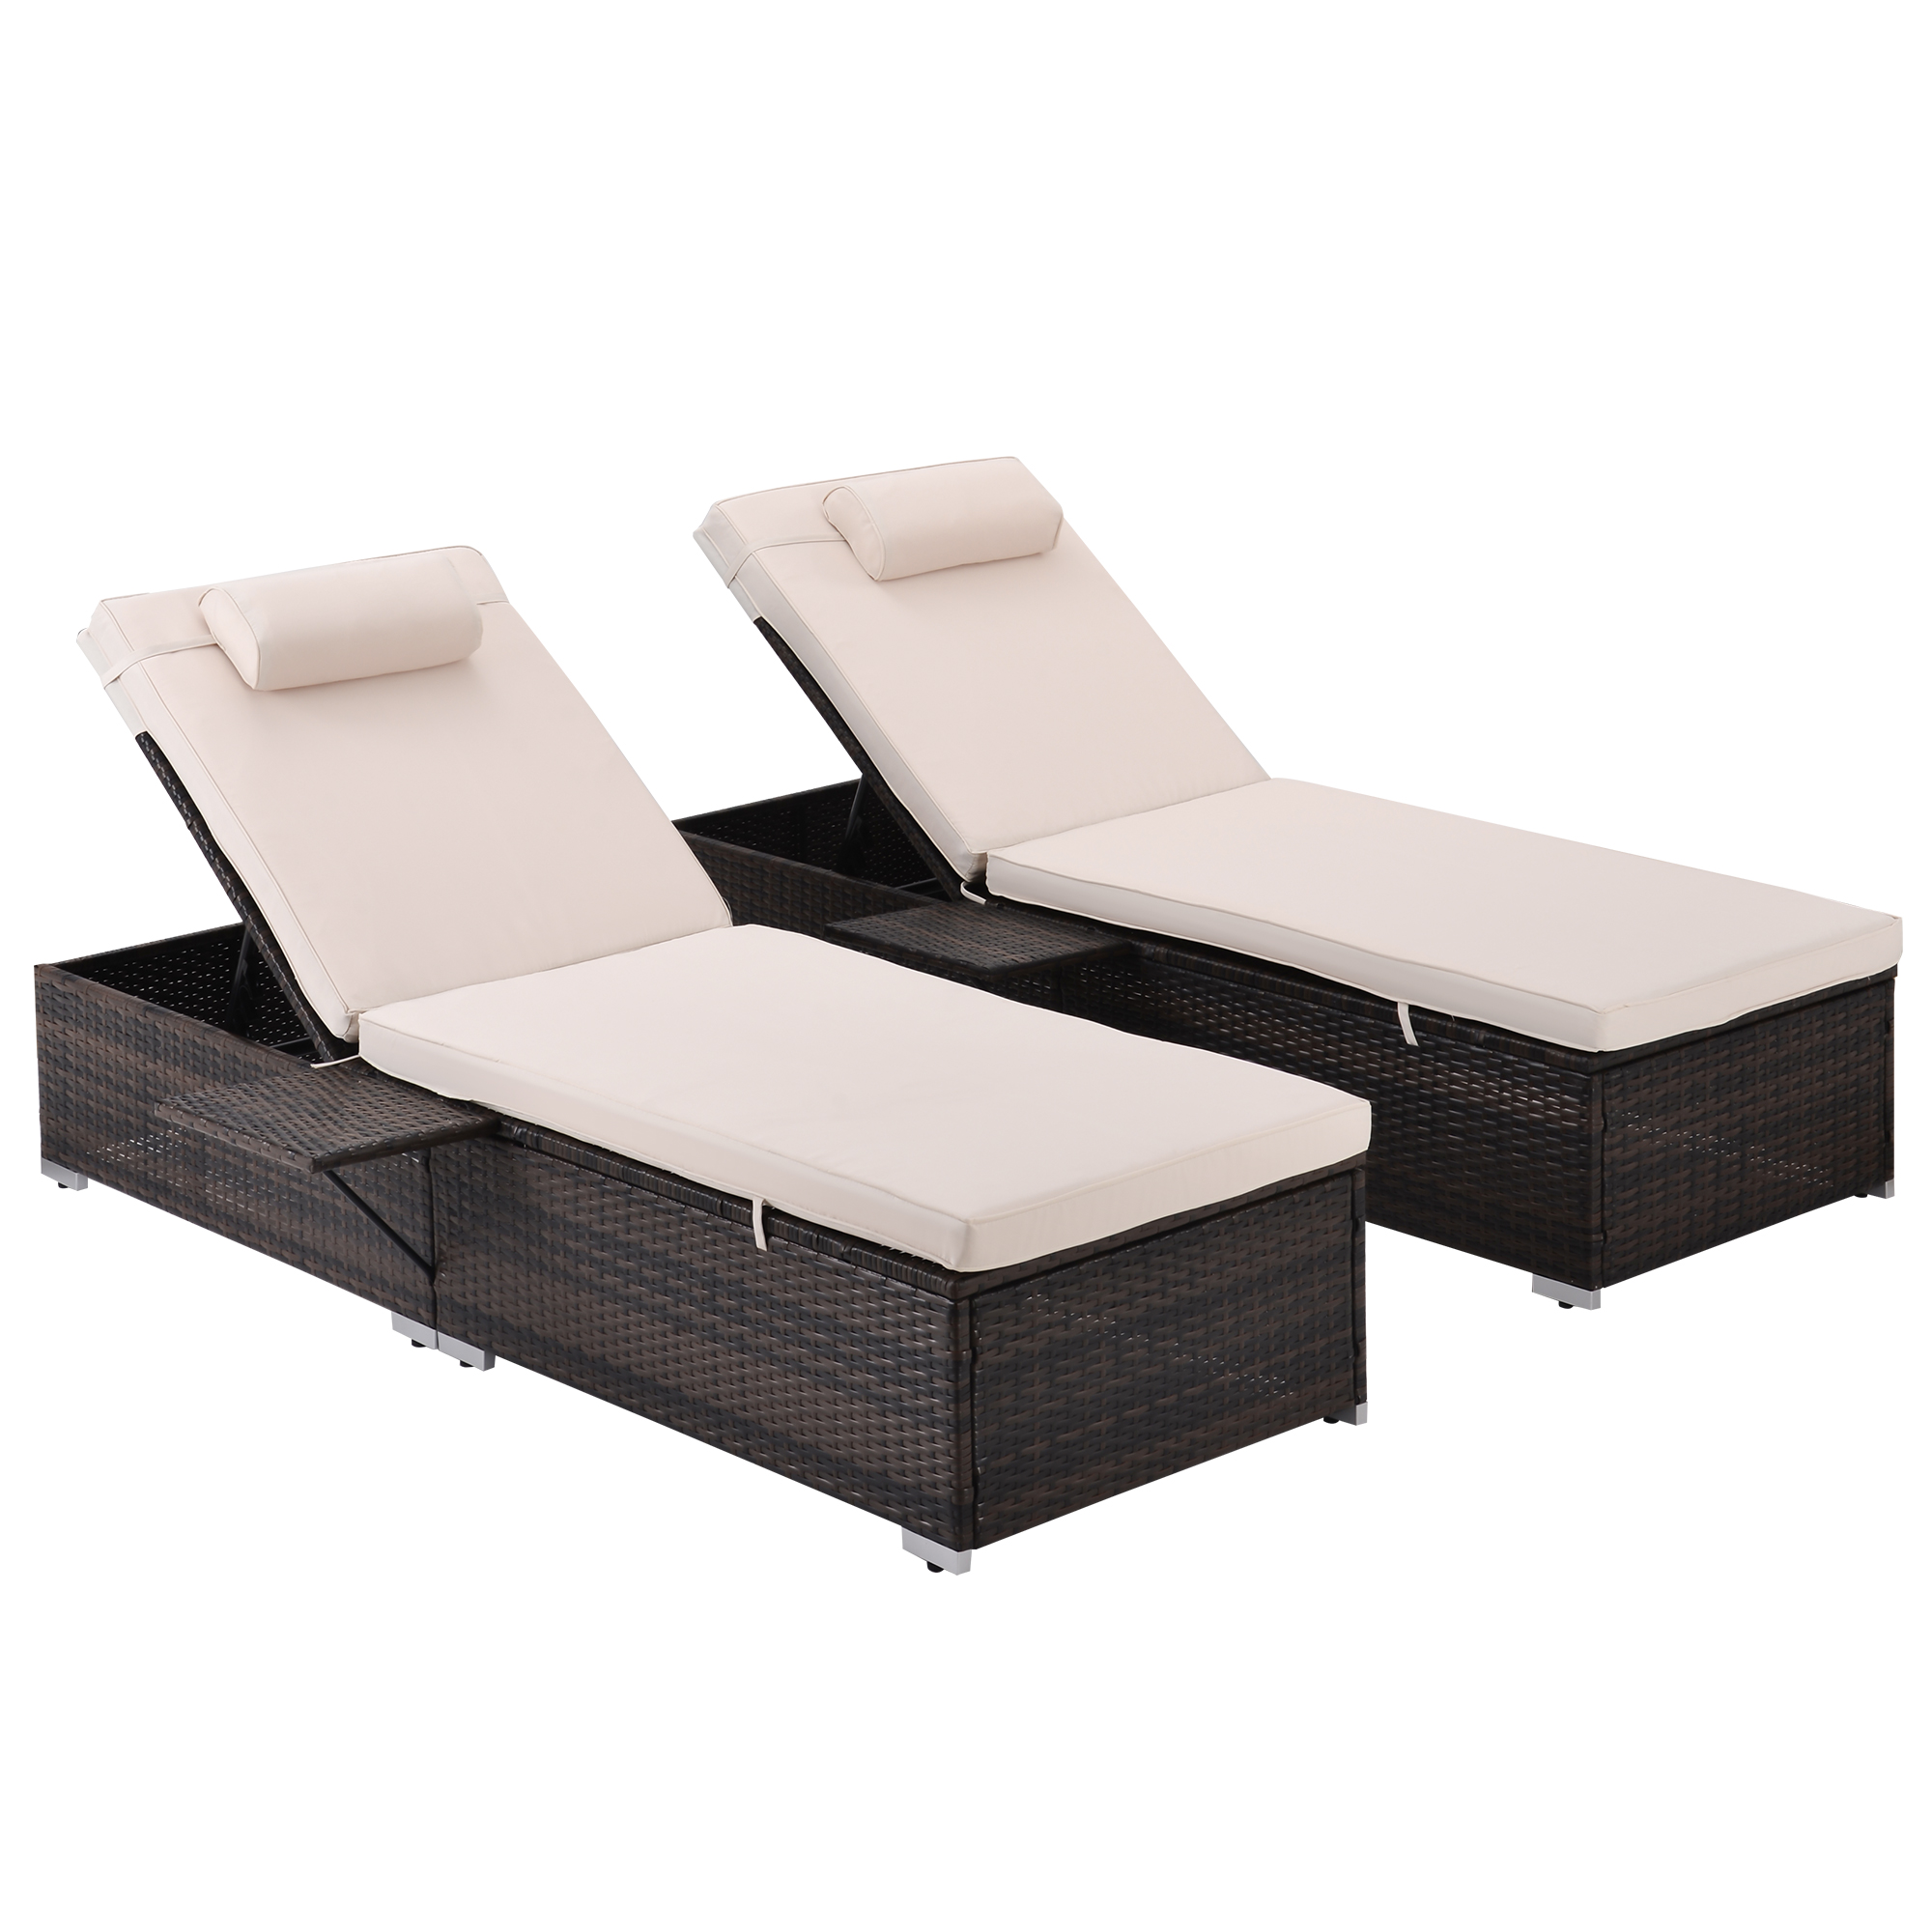 Outdoor PE Wicker Chaise Lounge, 2 Piece Patio Brown Rattan Reclining Chair Furniture Set, Adjustable Backrest Recliners with Side Table and Comfort Head Pillow(Beige) - image 1 of 11